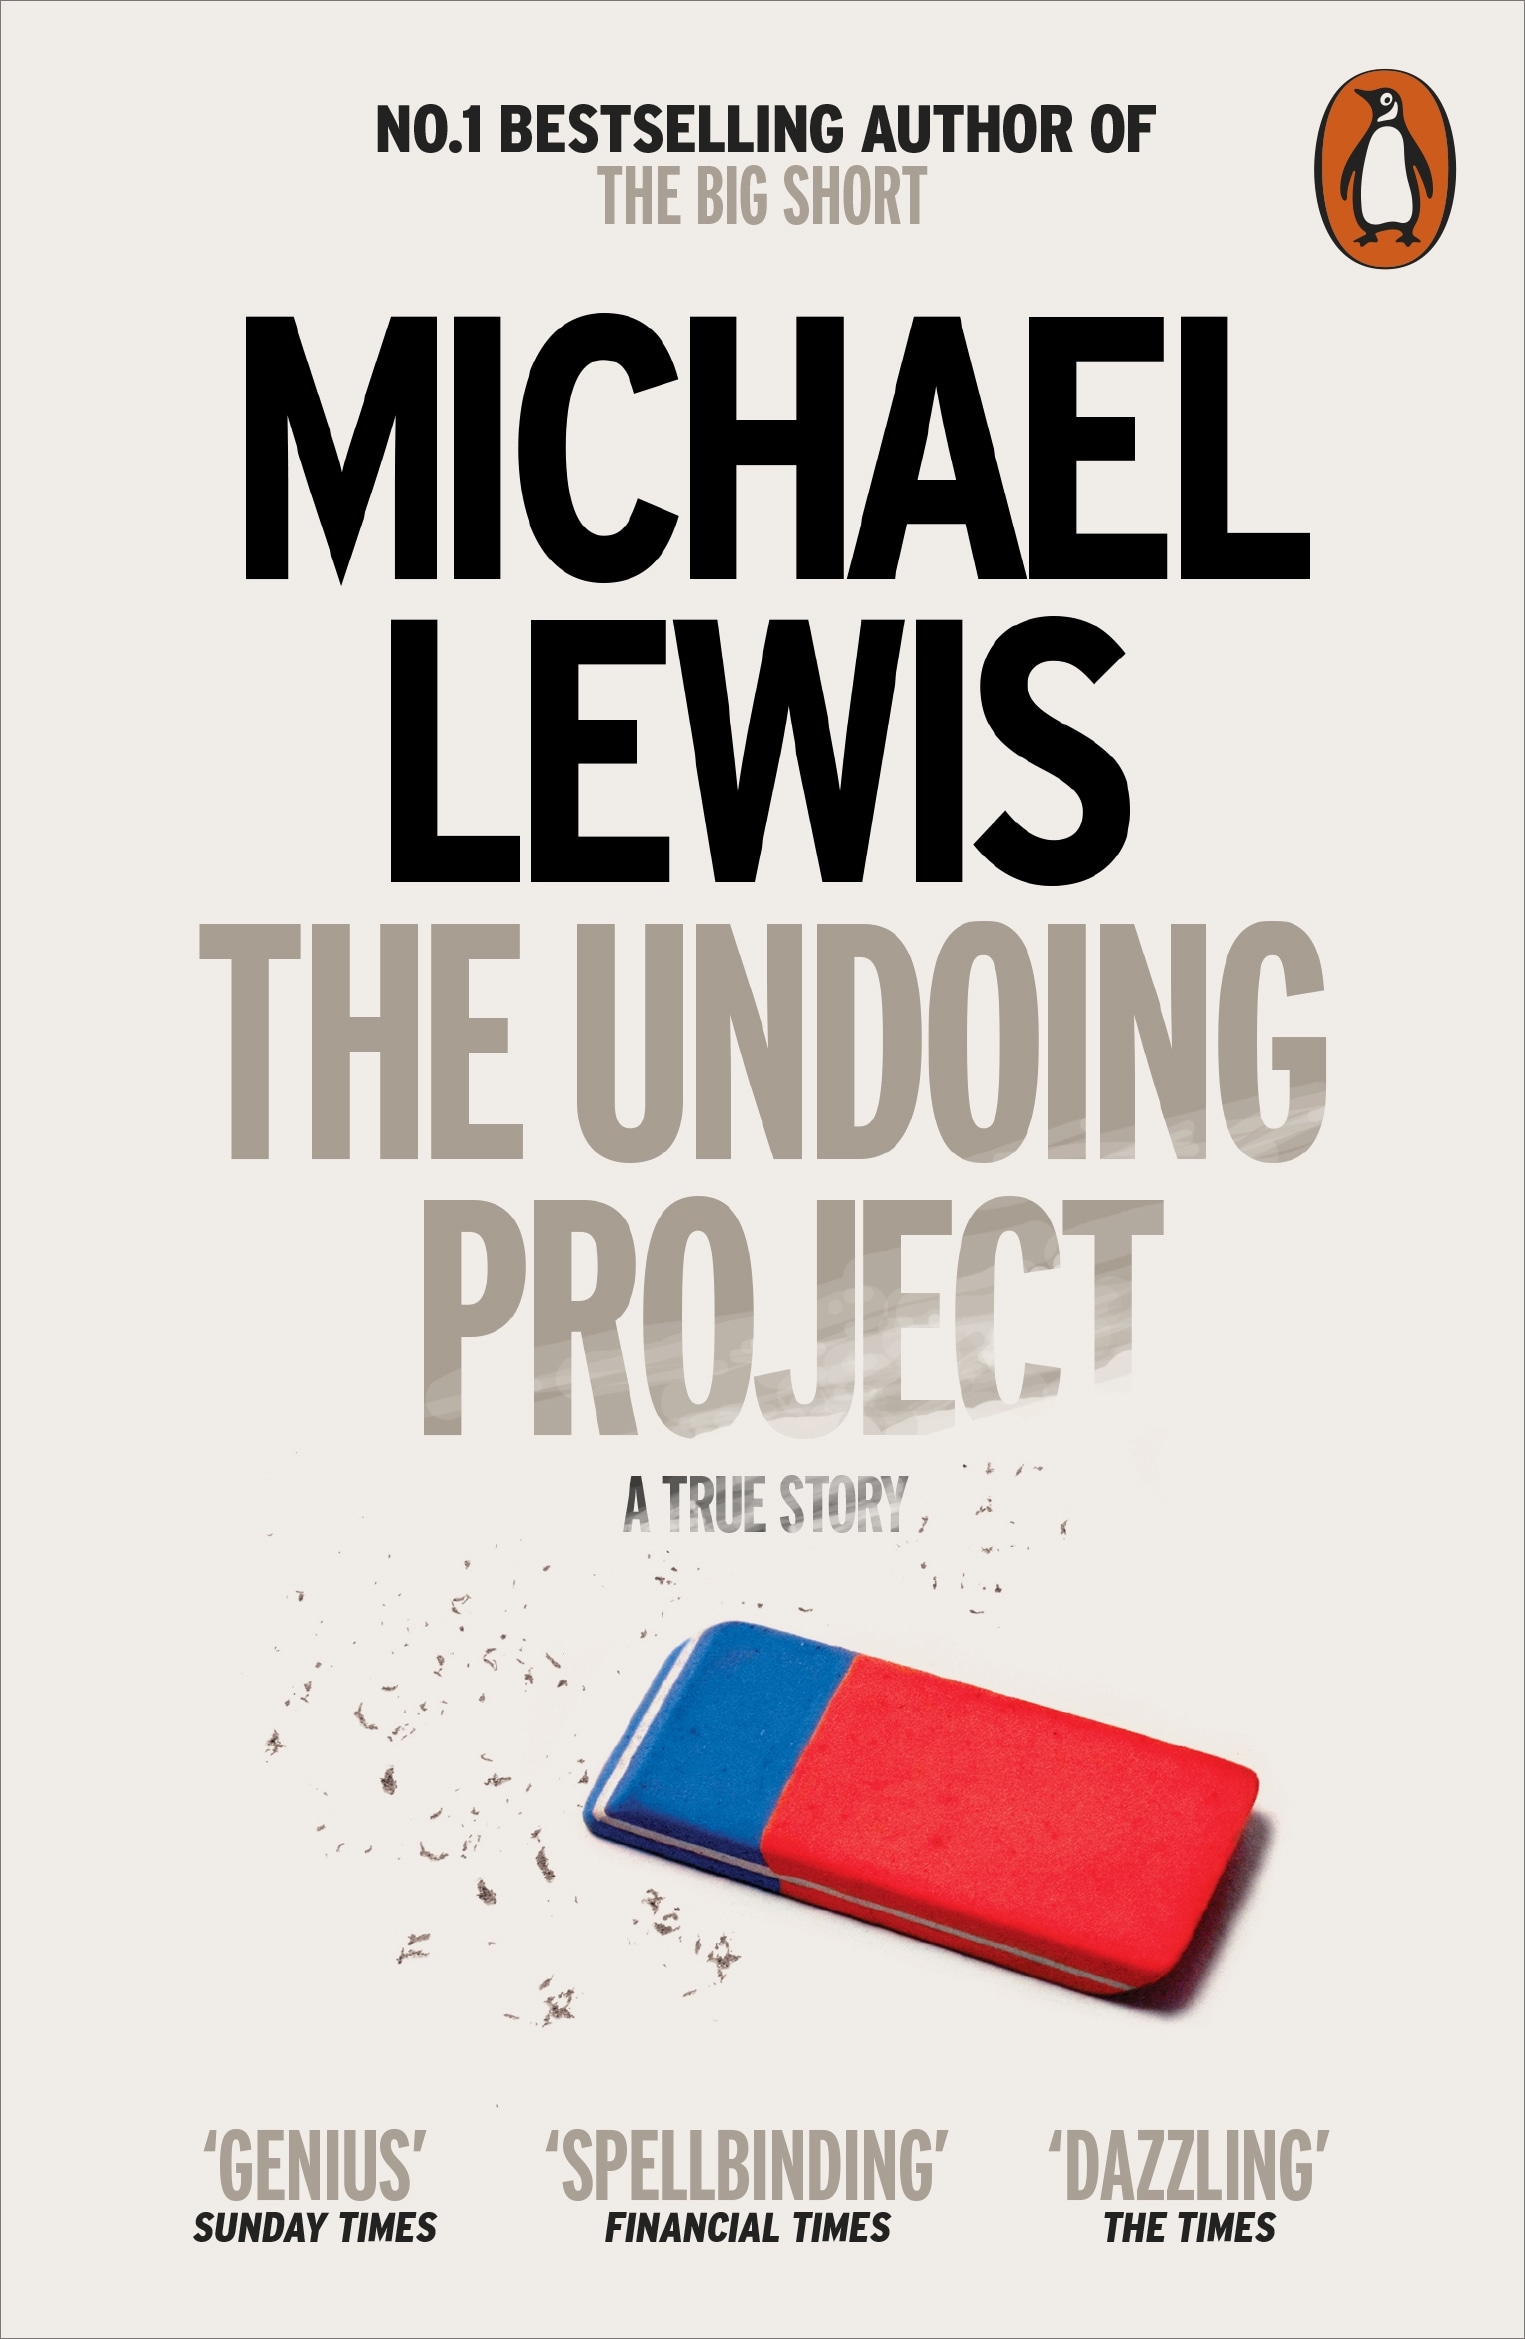 Book “The Undoing Project” by Michael Lewis — October 31, 2017